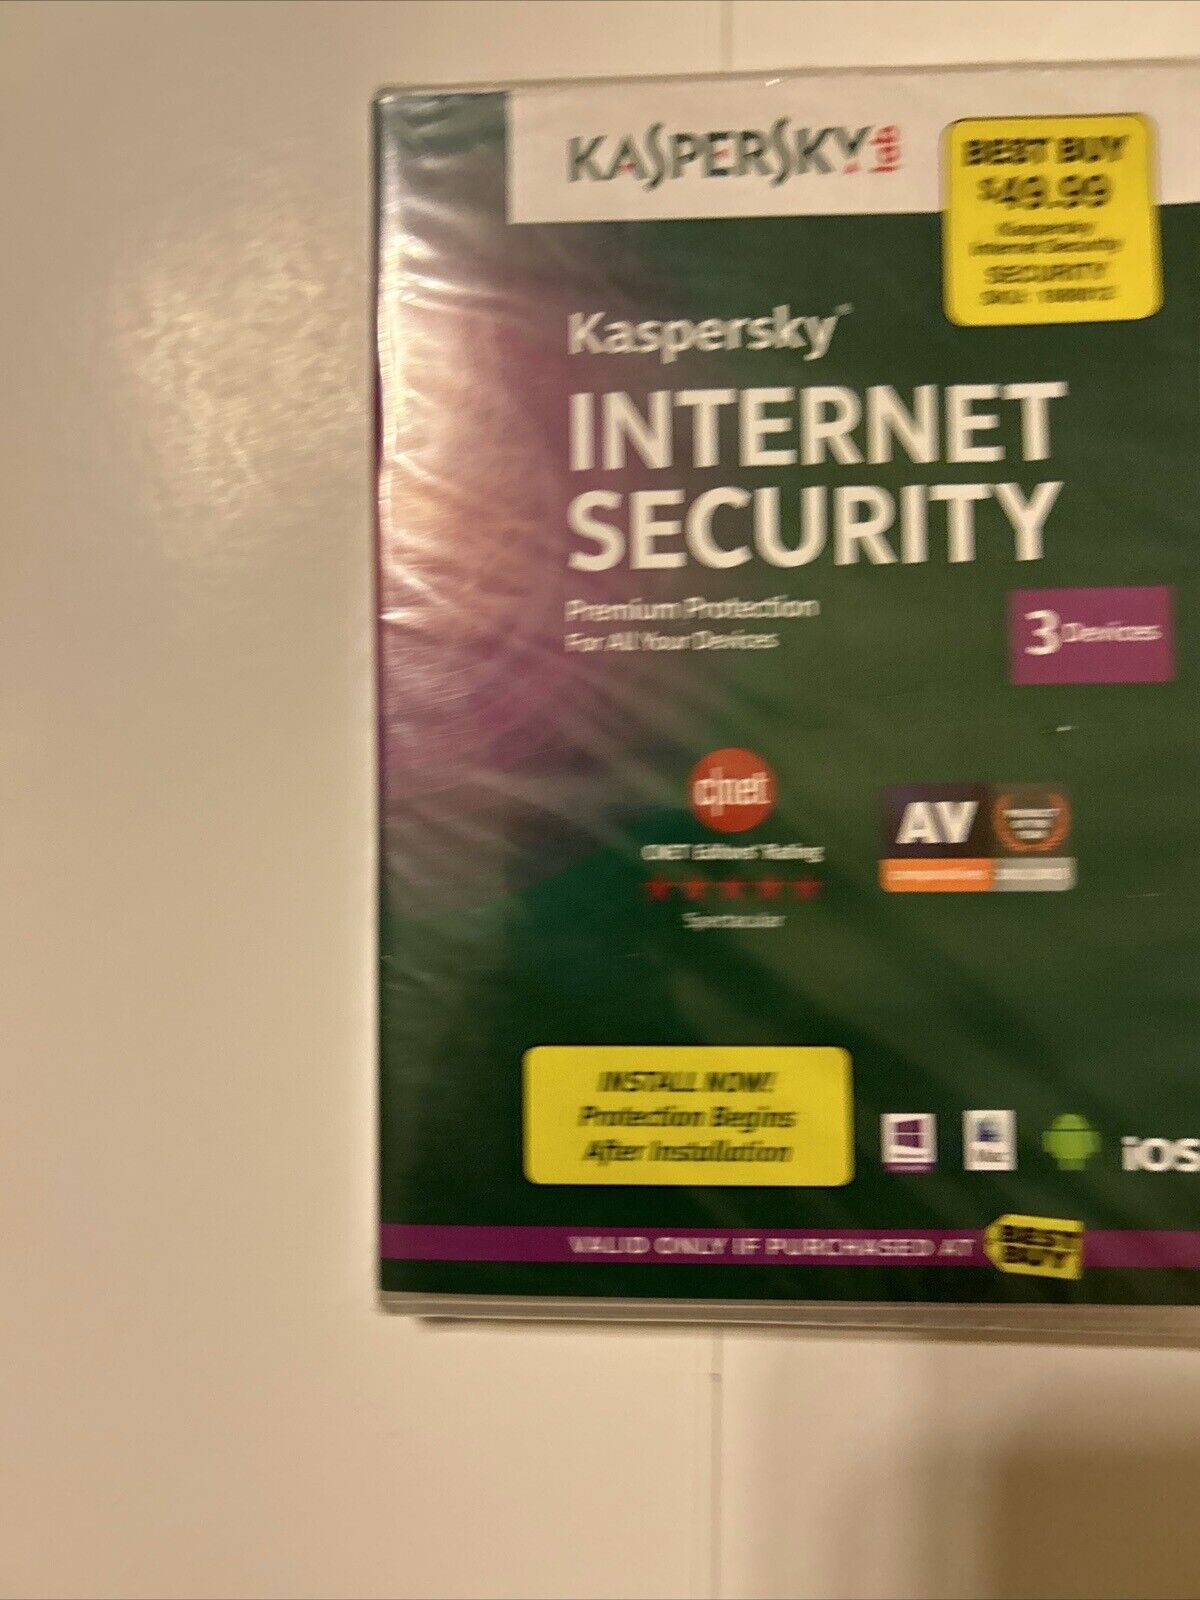 Lab Categories Internet Security Premium Protection 3 Devices 2014 NEW & Sealed